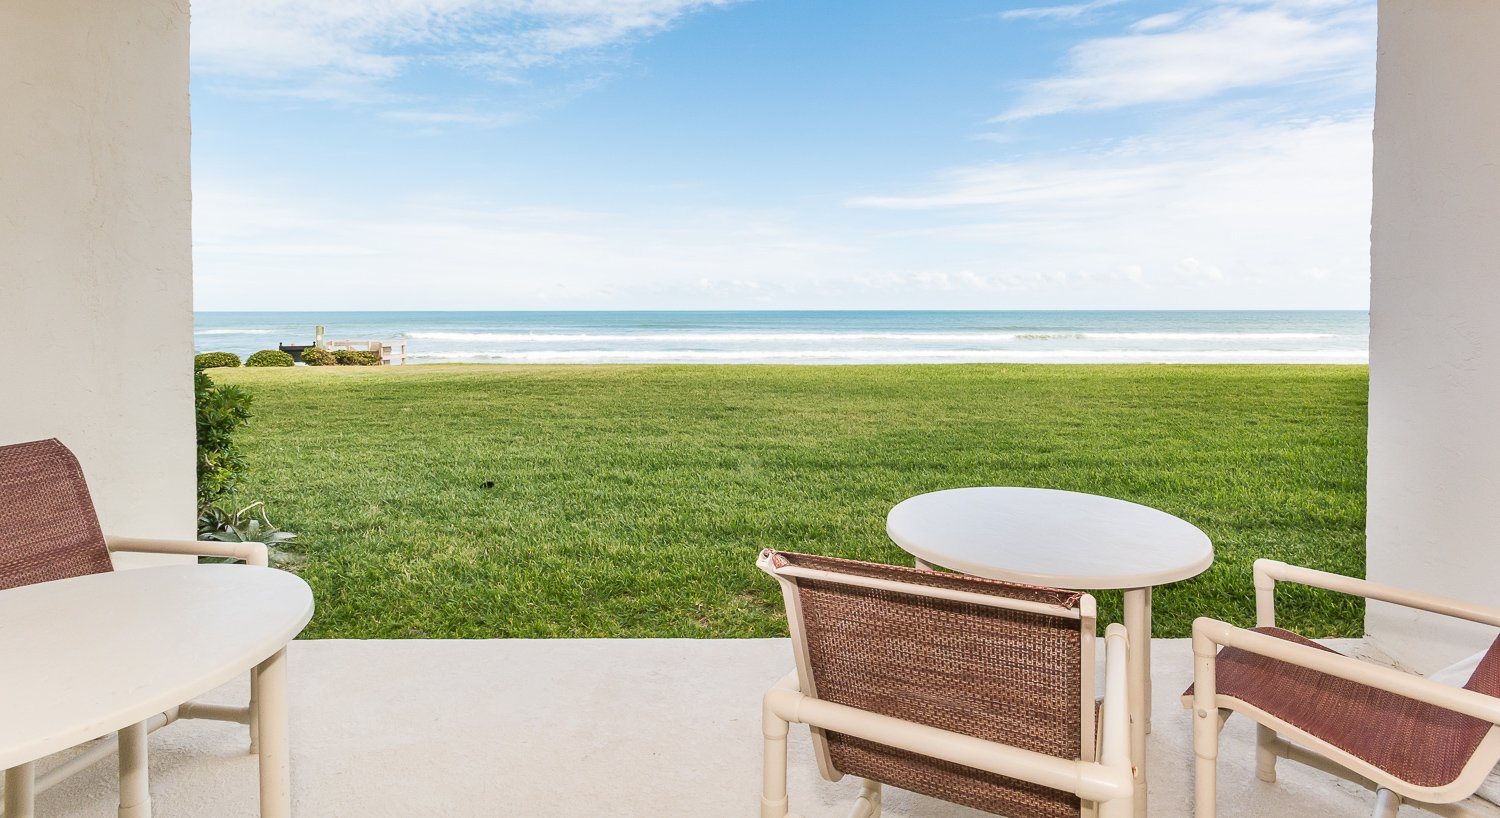 Enjoy the outdoor seating set in the patio with ocean view